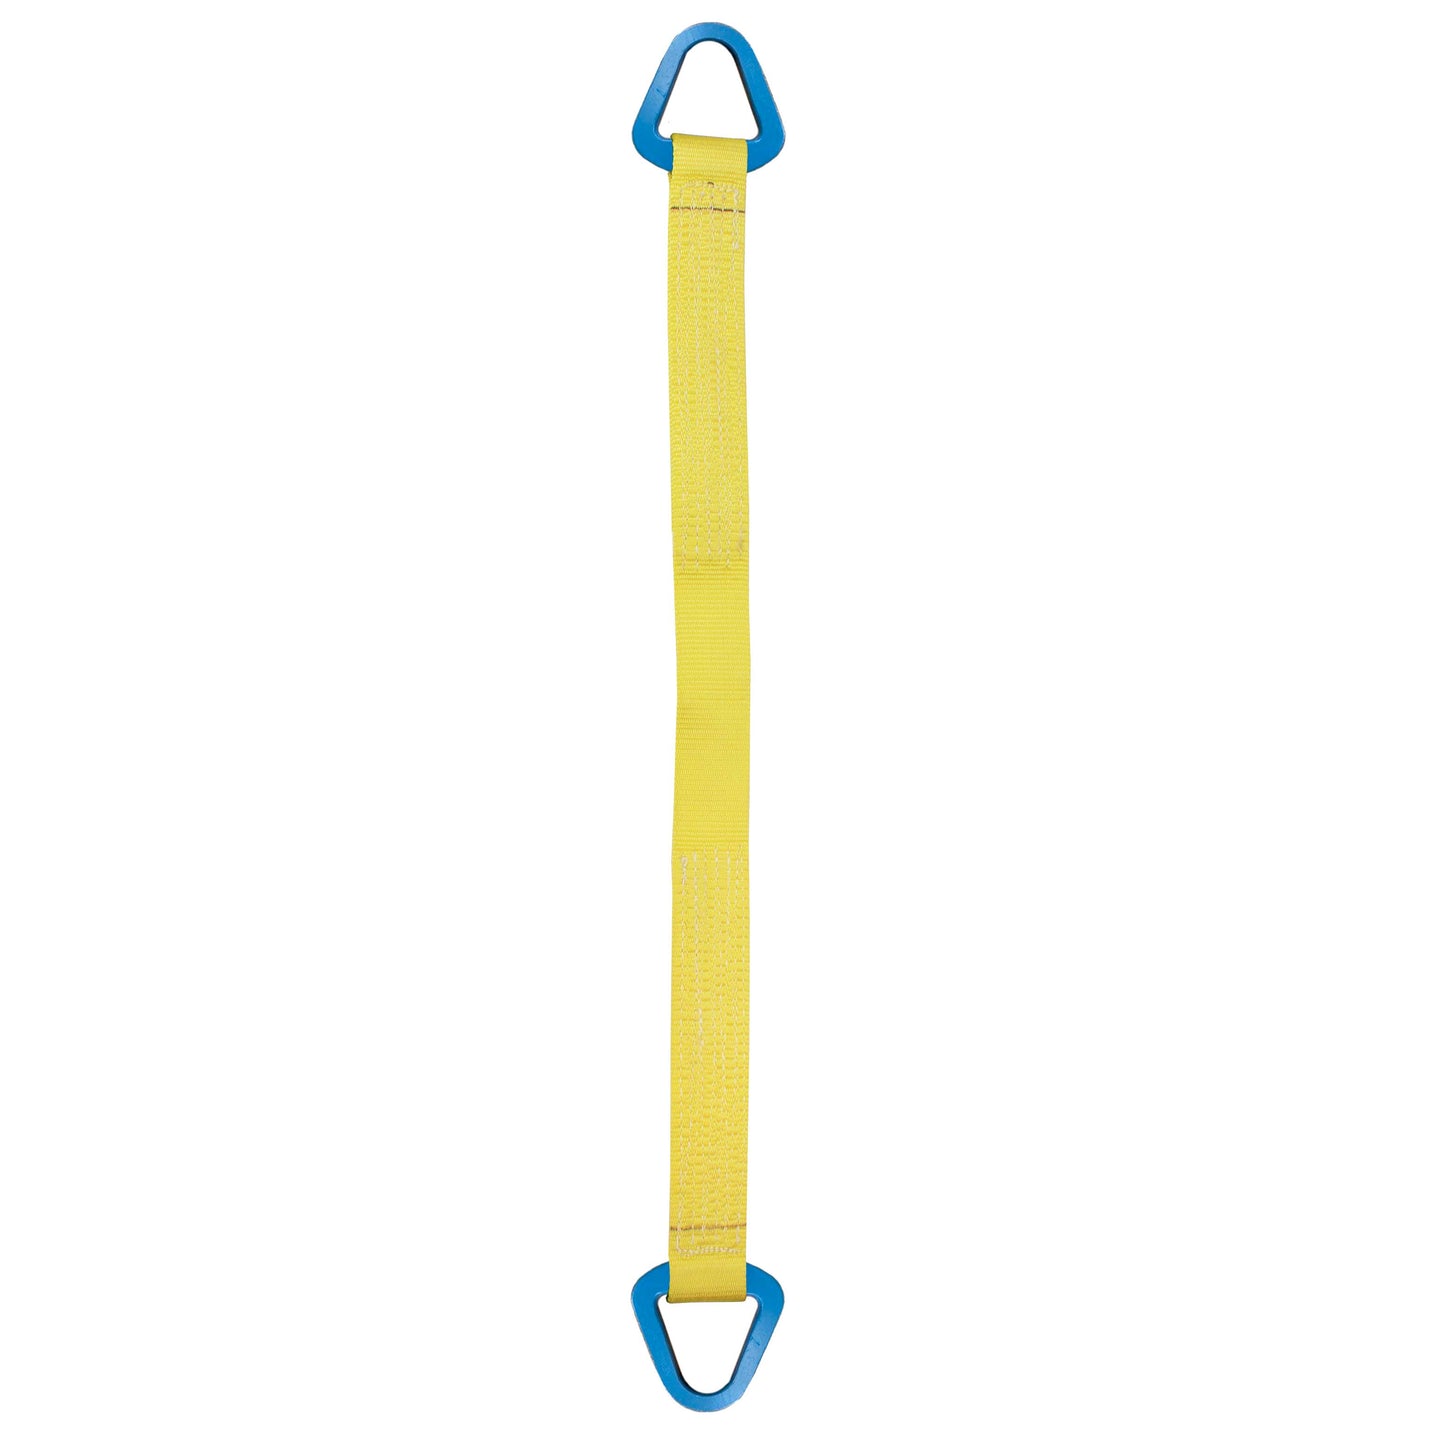 Nylon Lifting Sling Triangle 10 inch x 6 foot 2ply image 1 of 2